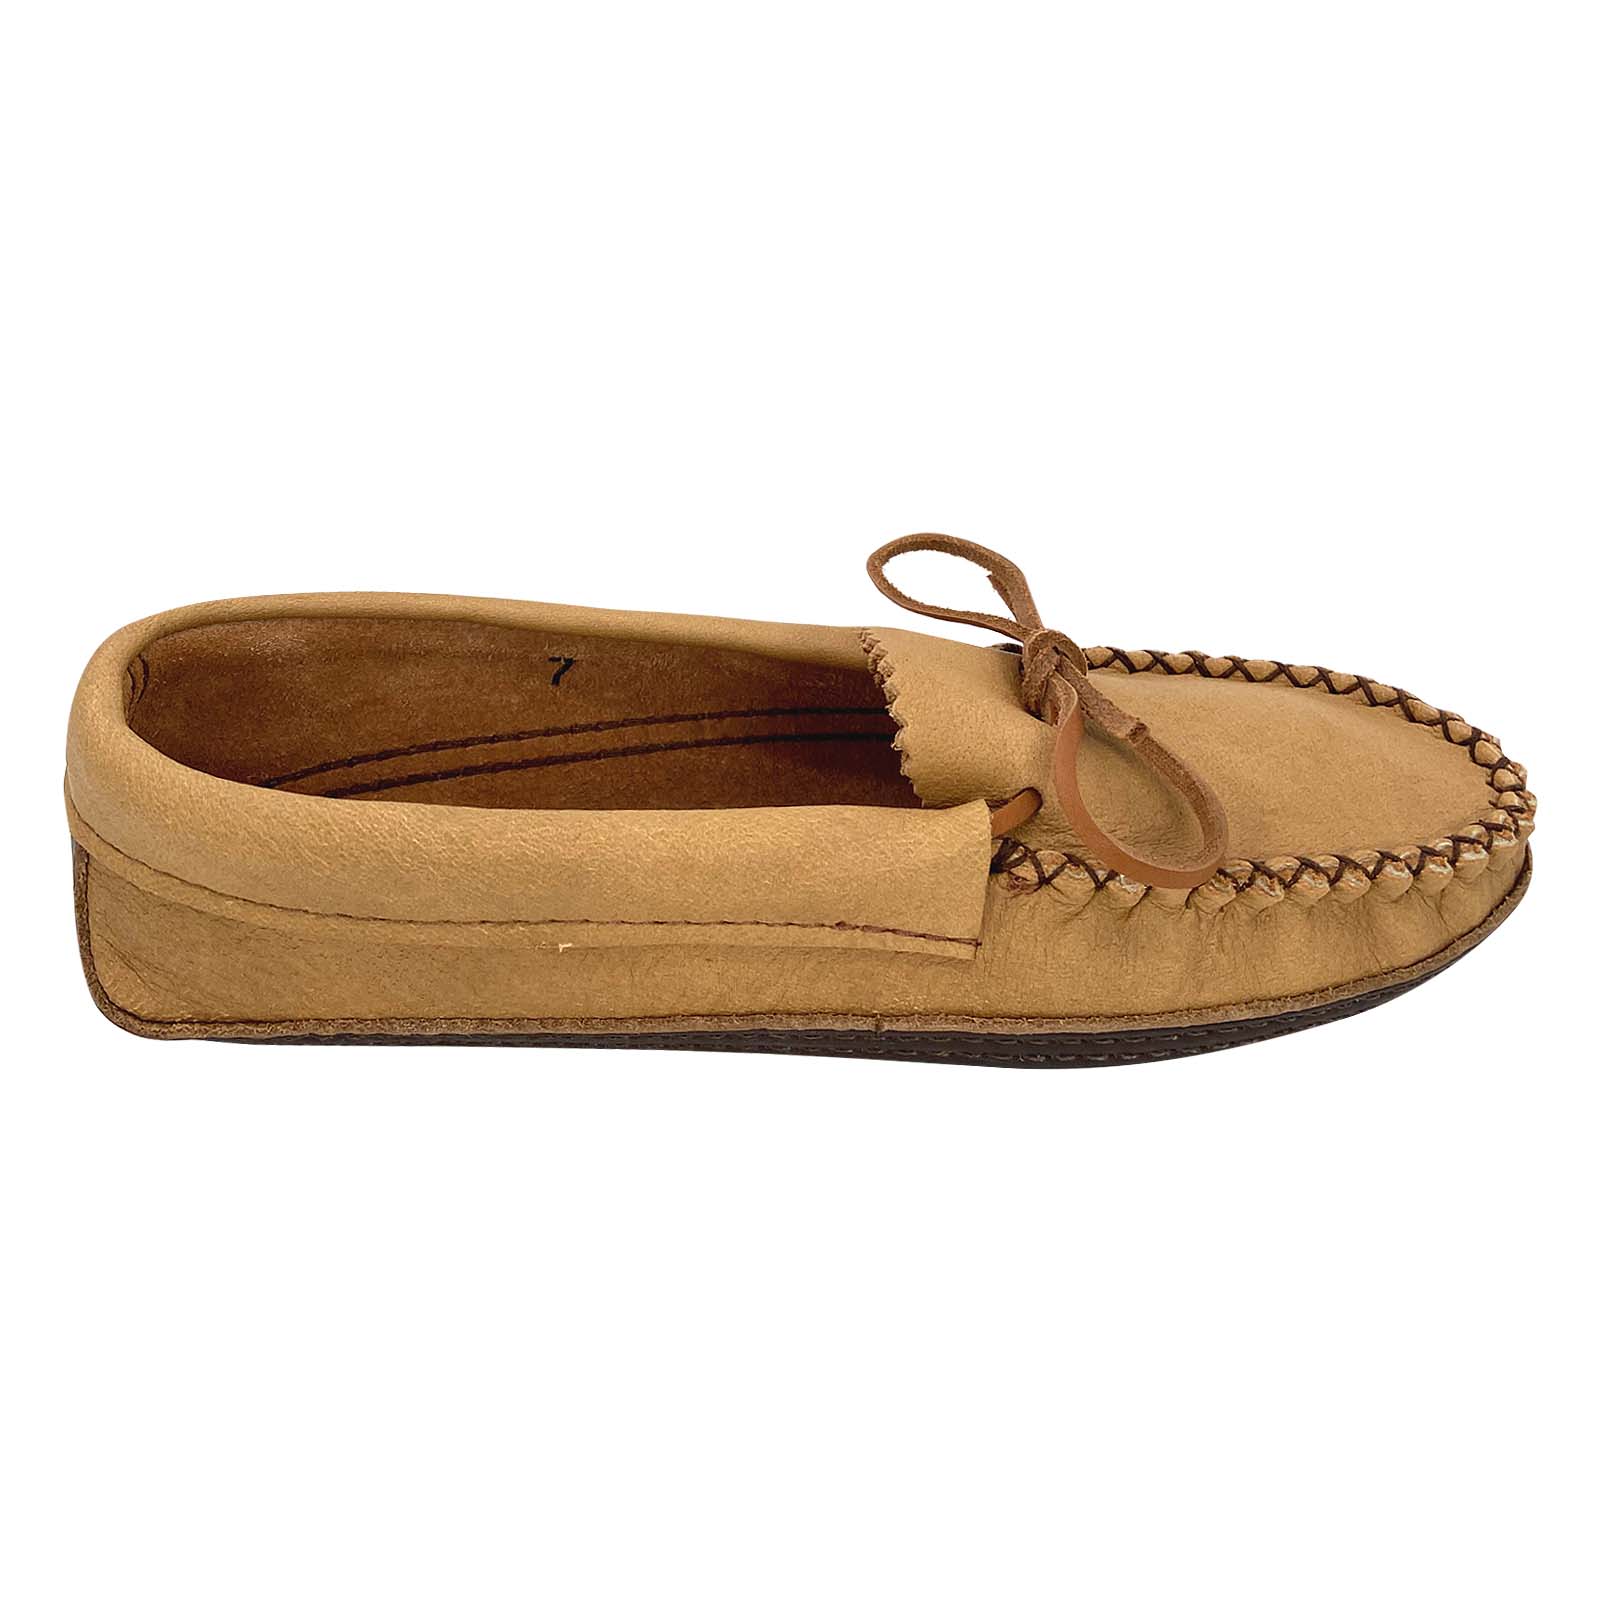 Moccasin Tandy Leather Kit House Shoe Women 10.5 to 11 Stiff